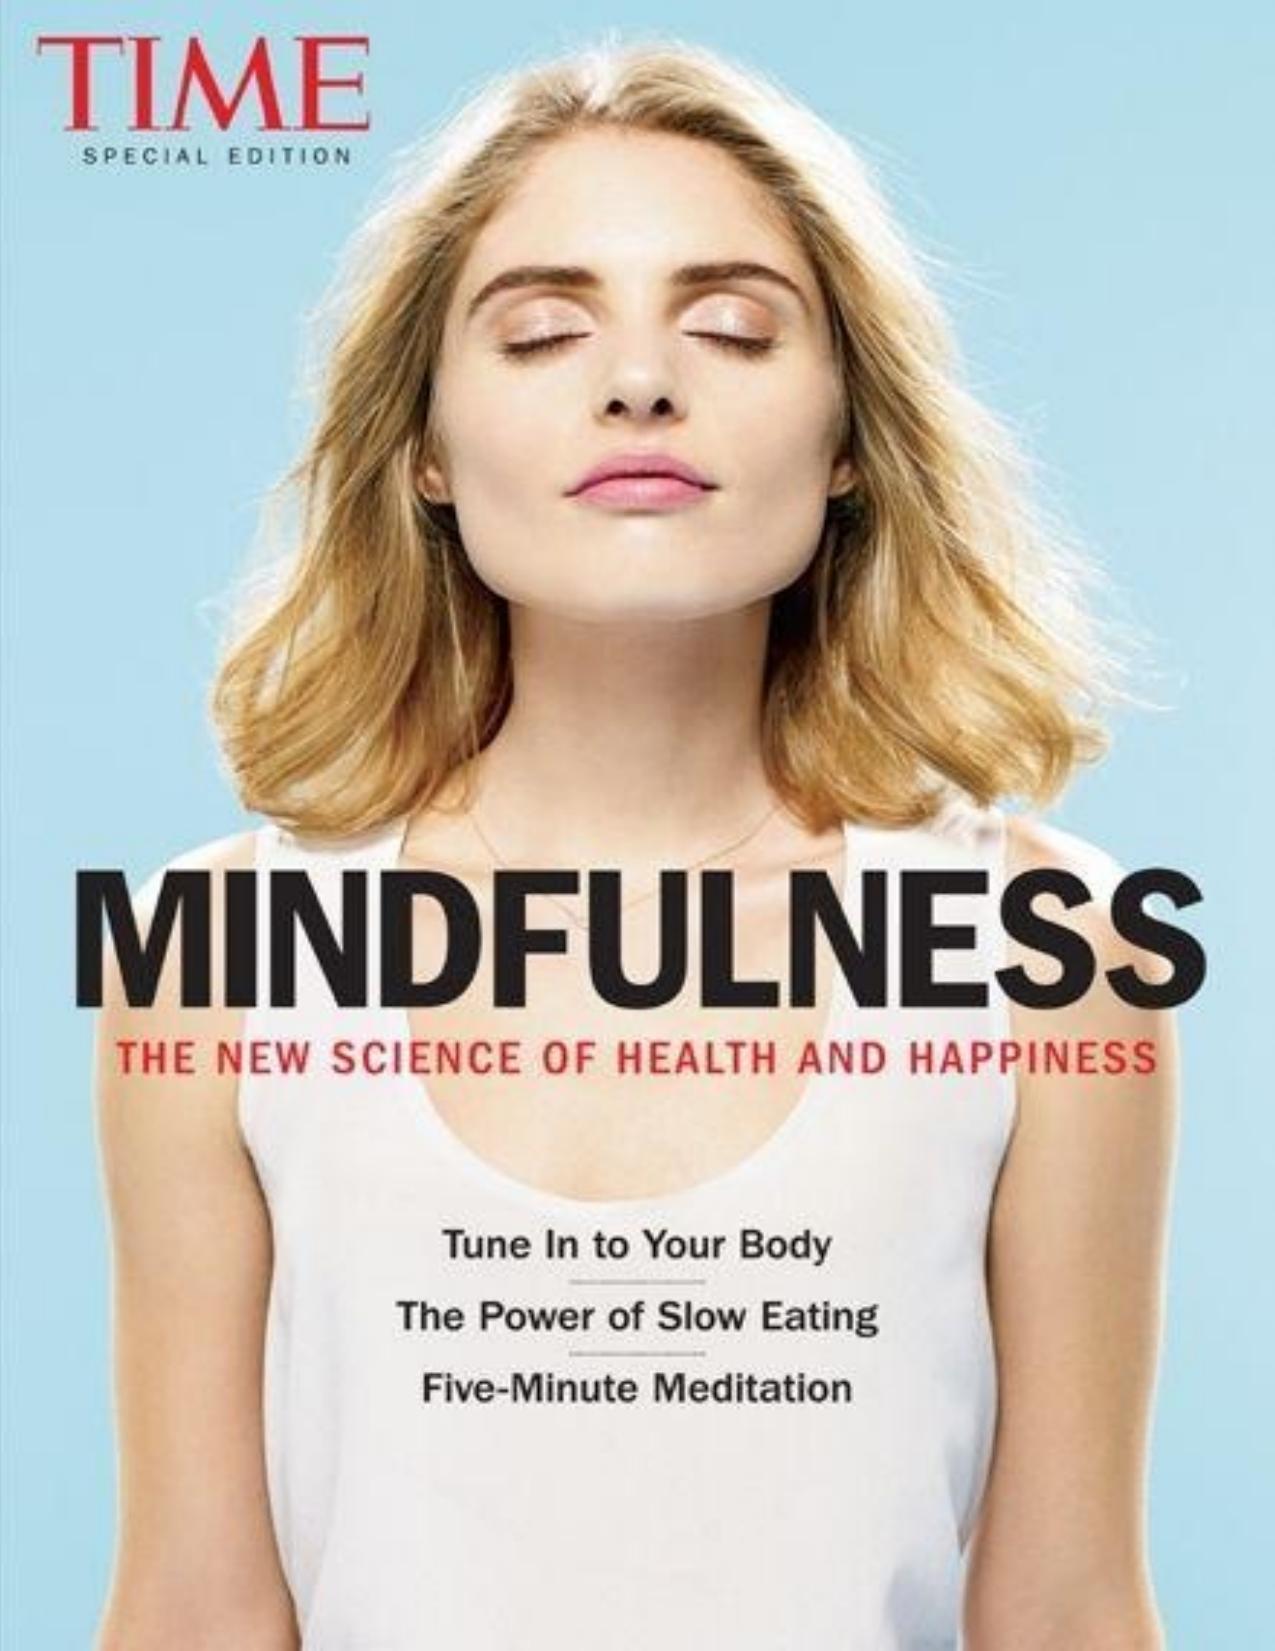 TIME Mindfulness: The New Science of Health and Happiness by The Editors of TIME